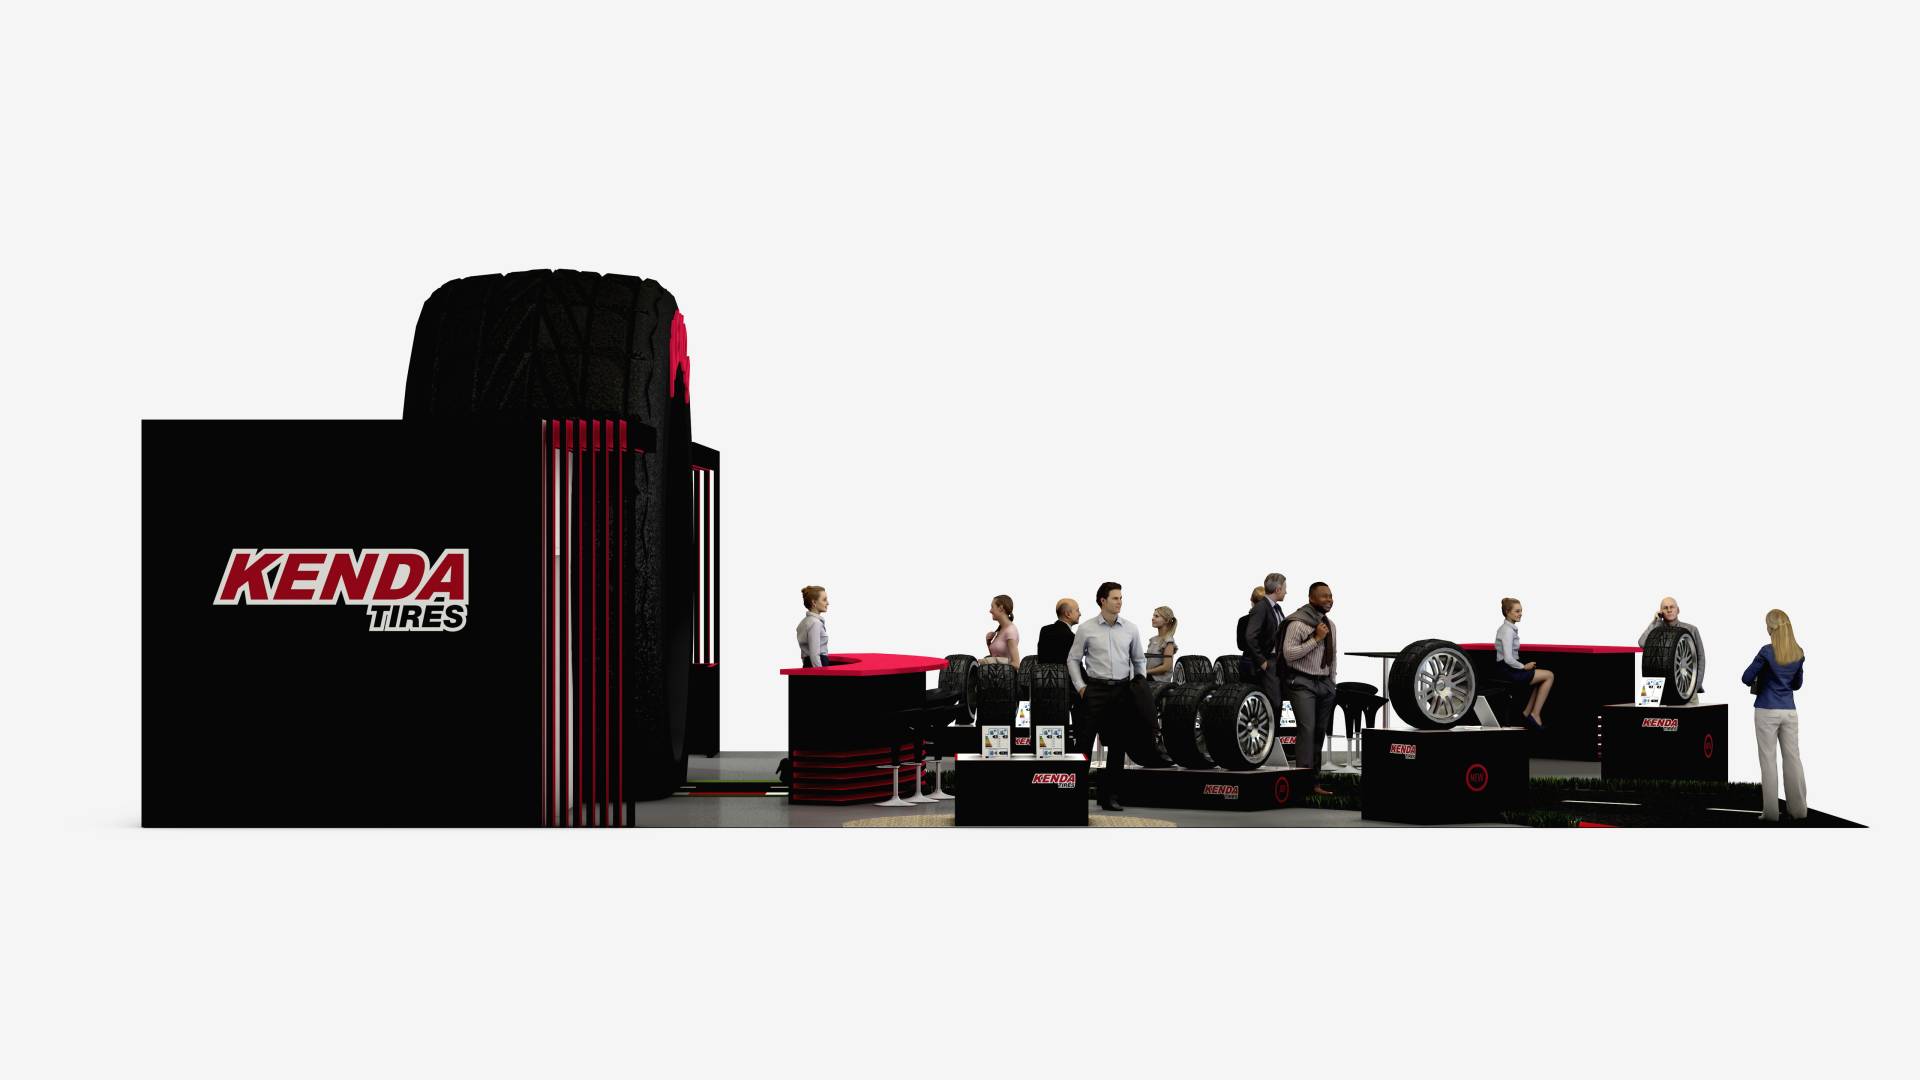 Design of the KENDA stand from the side with the KENDA logo in focus